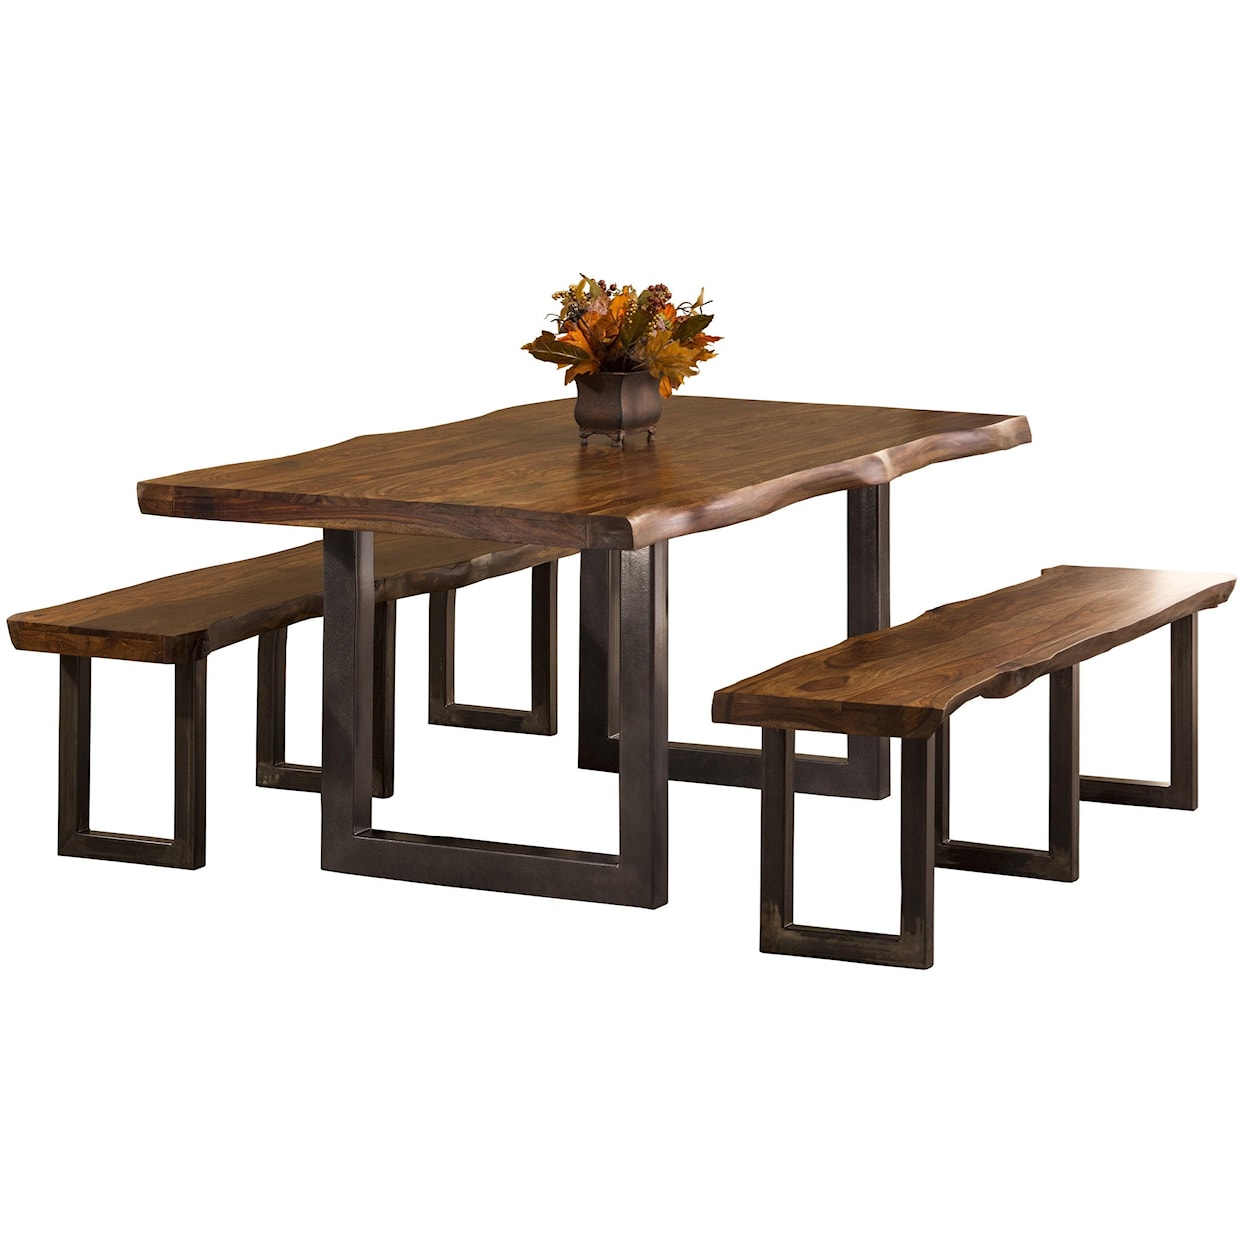 Hillsdale Emerson 3-Piece Rectangle Dining Set